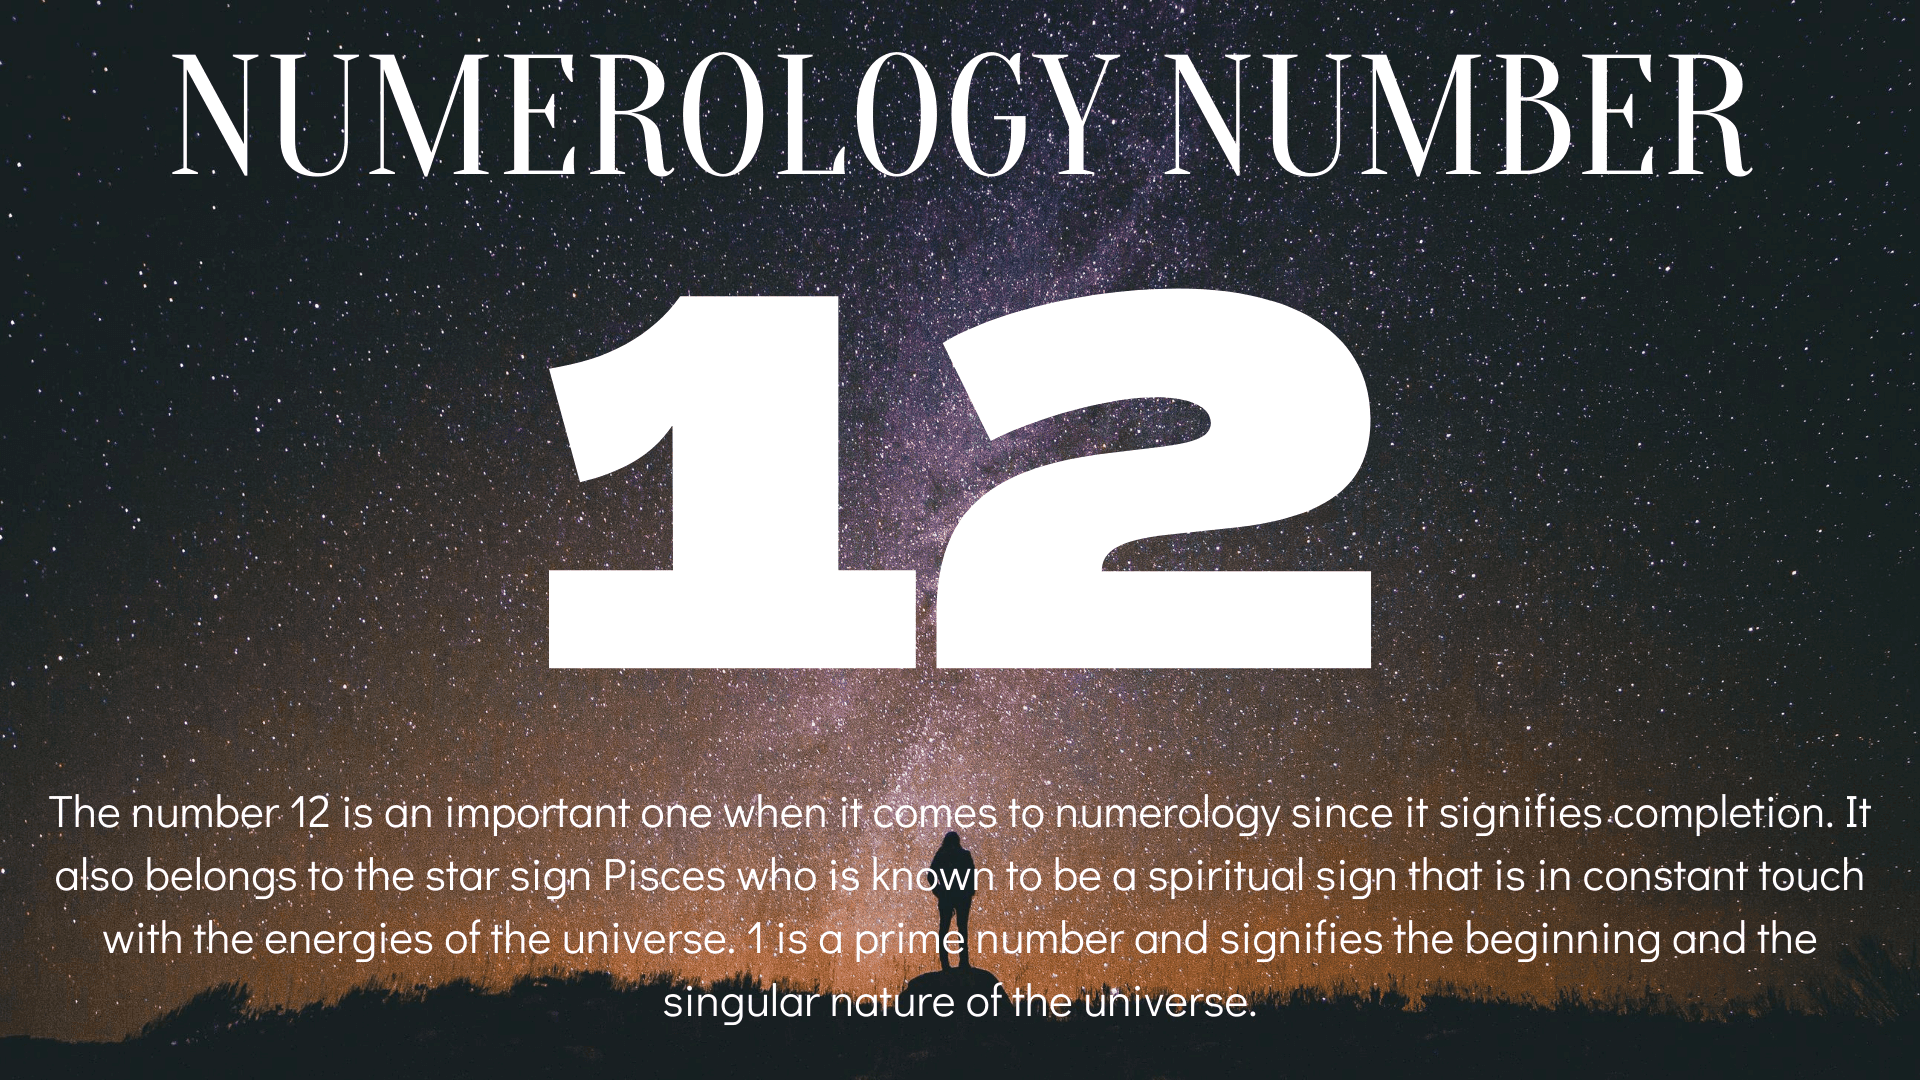 A person standing on a rock while looking at the stars with words Numerology Number 12